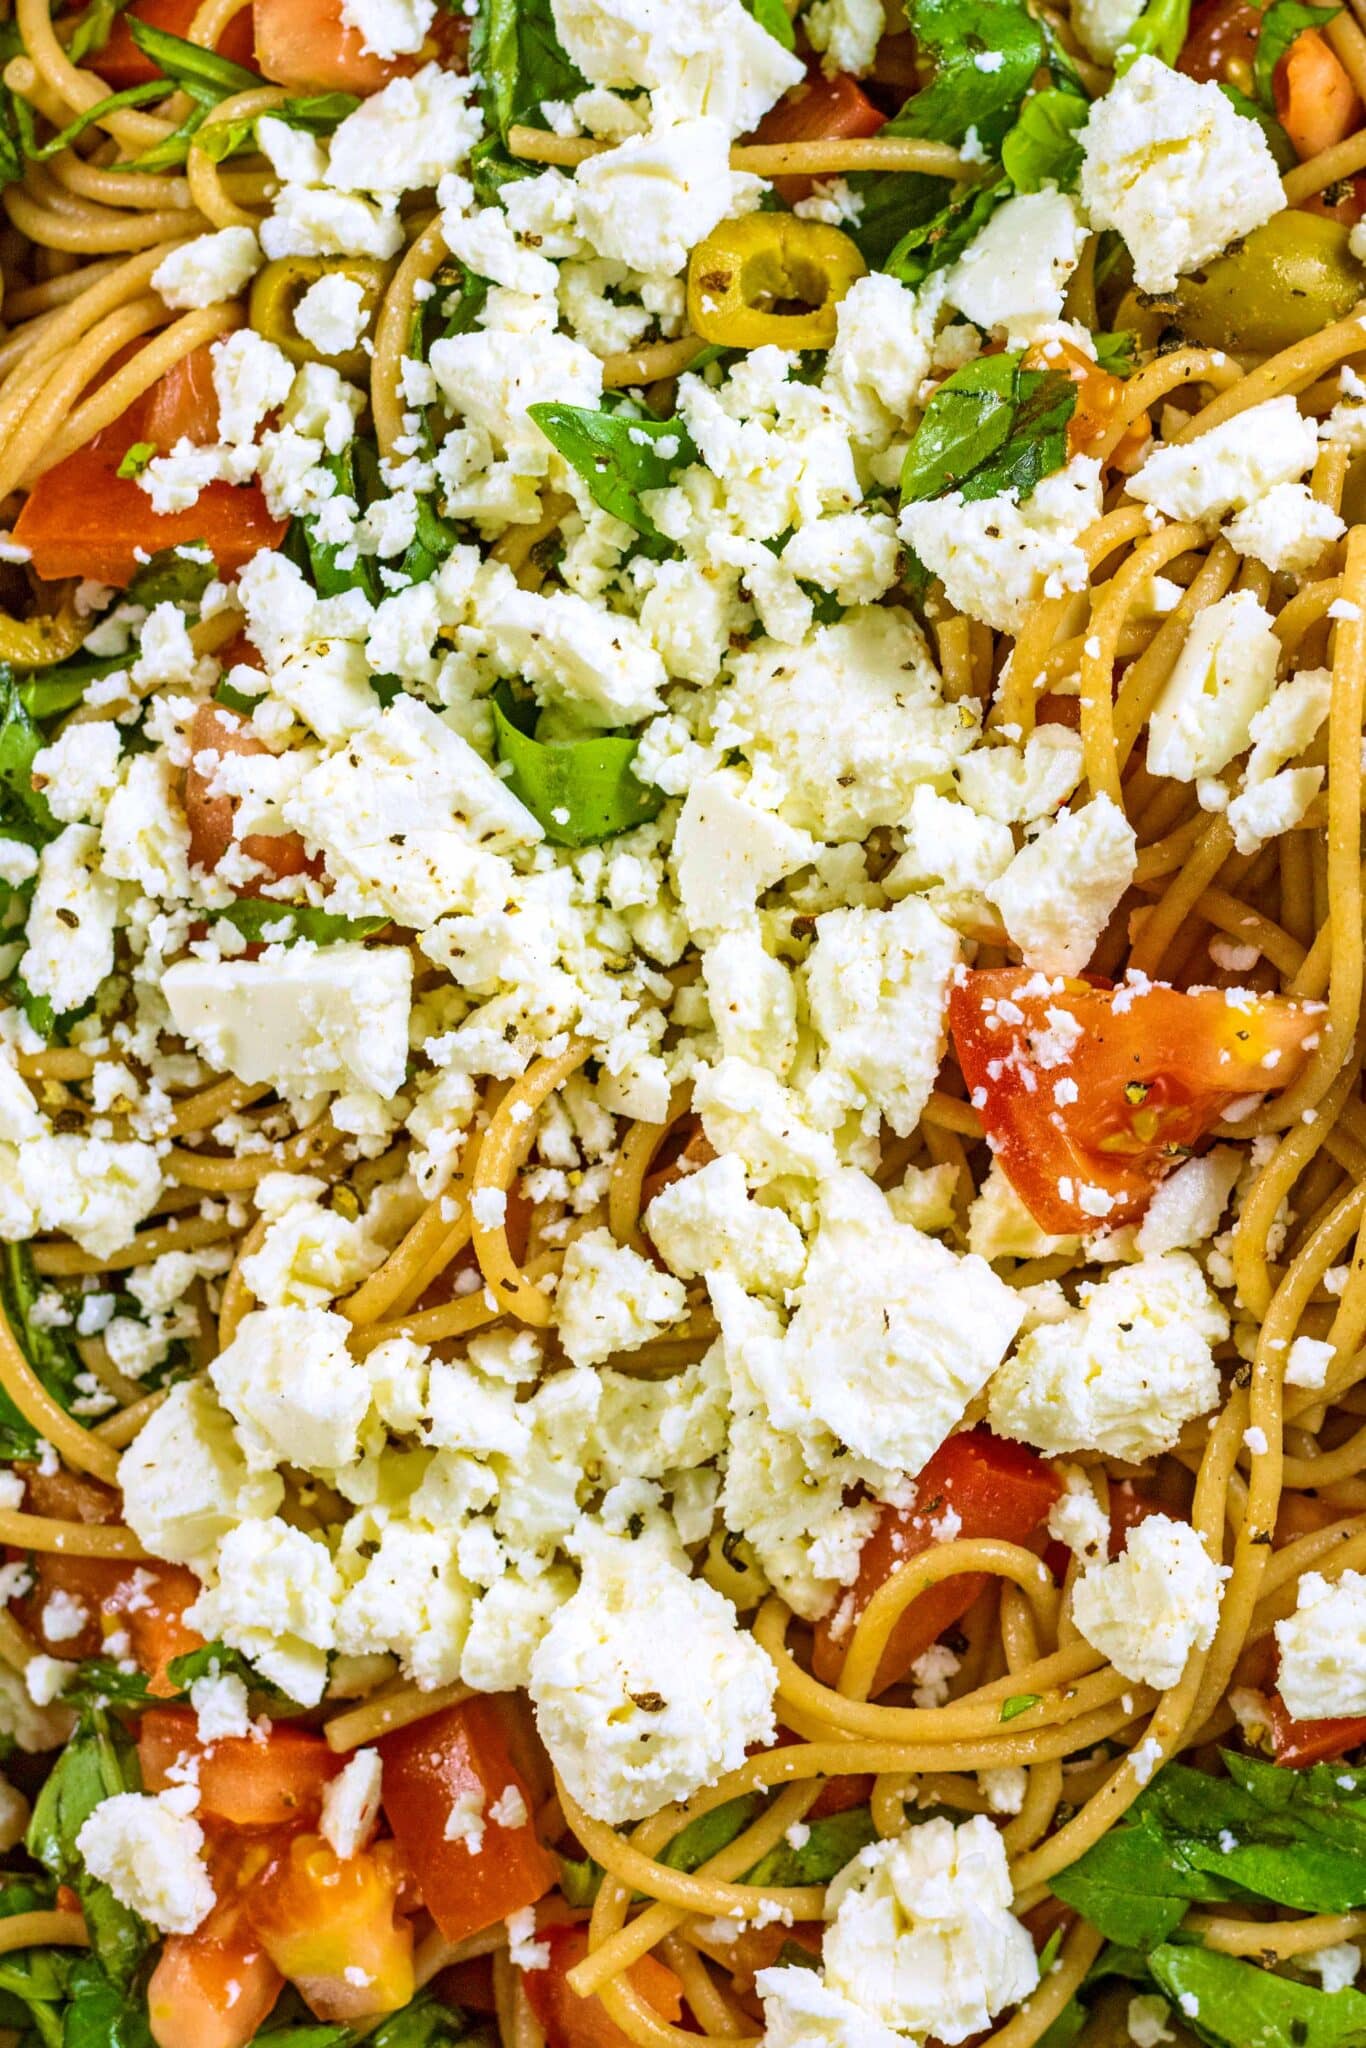 Crumbled feta on top of spaghetti, tomatoes, olives and basil.